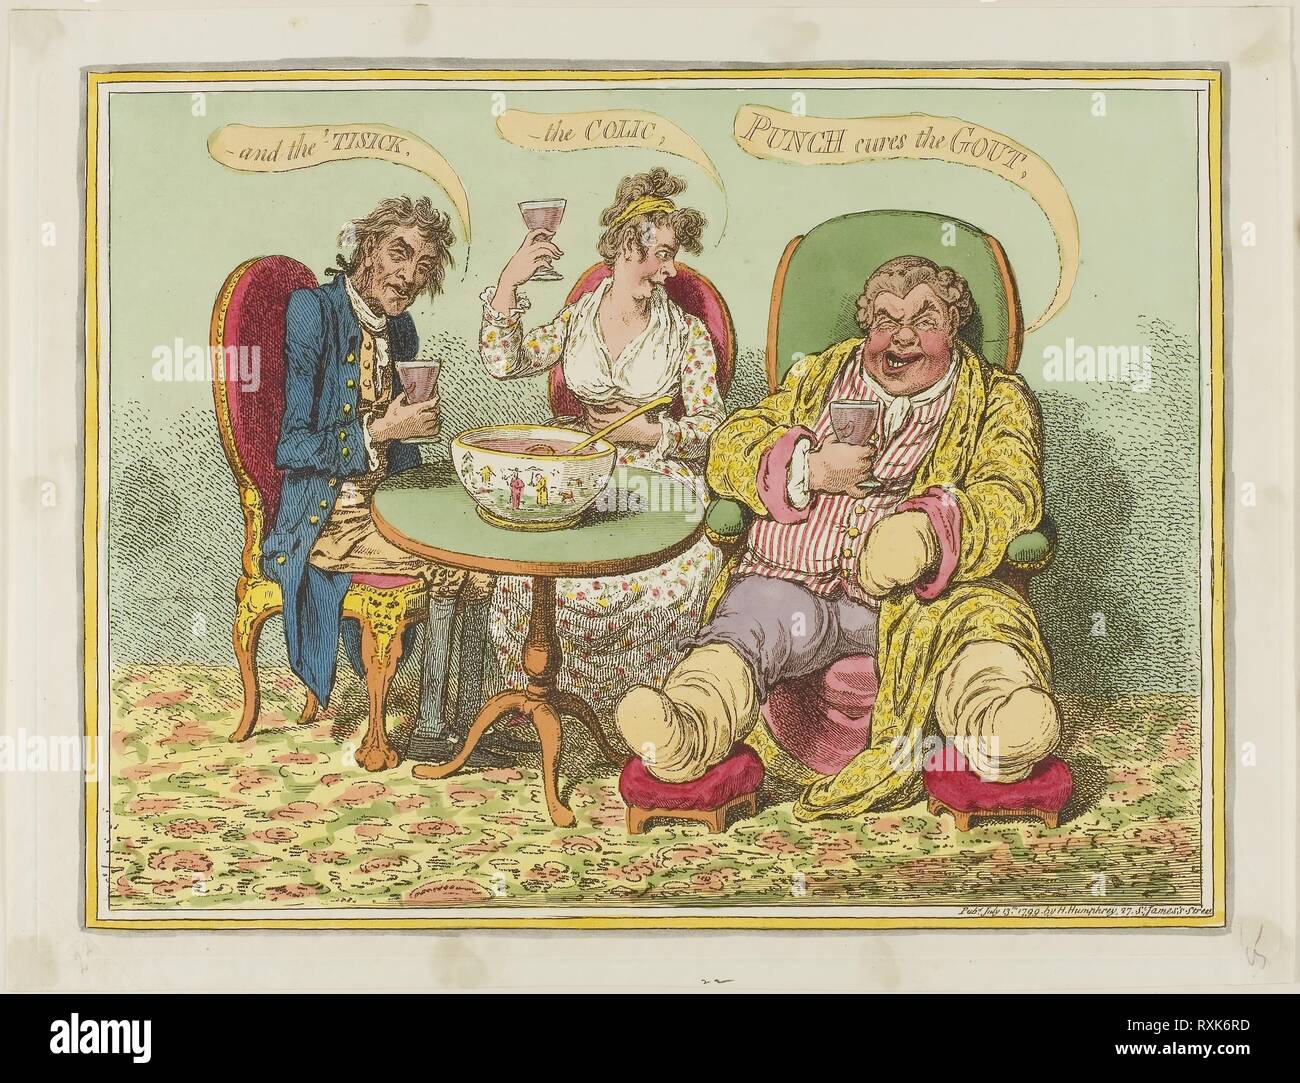 Punch Cures the Gout, the Colic, and the 'Tisick. James Gillray (English, 1756-1815); published by Hannah Humphrey (English, c. 1745-1818). Date: 1799. Dimensions: 258 × 340 mm (image); 262 × 364 mm (plate); 288 × 377 mm (sheet). Hand-colored etching with engraving on ivory wove paper. Origin: England. Museum: The Chicago Art Institute. Stock Photo